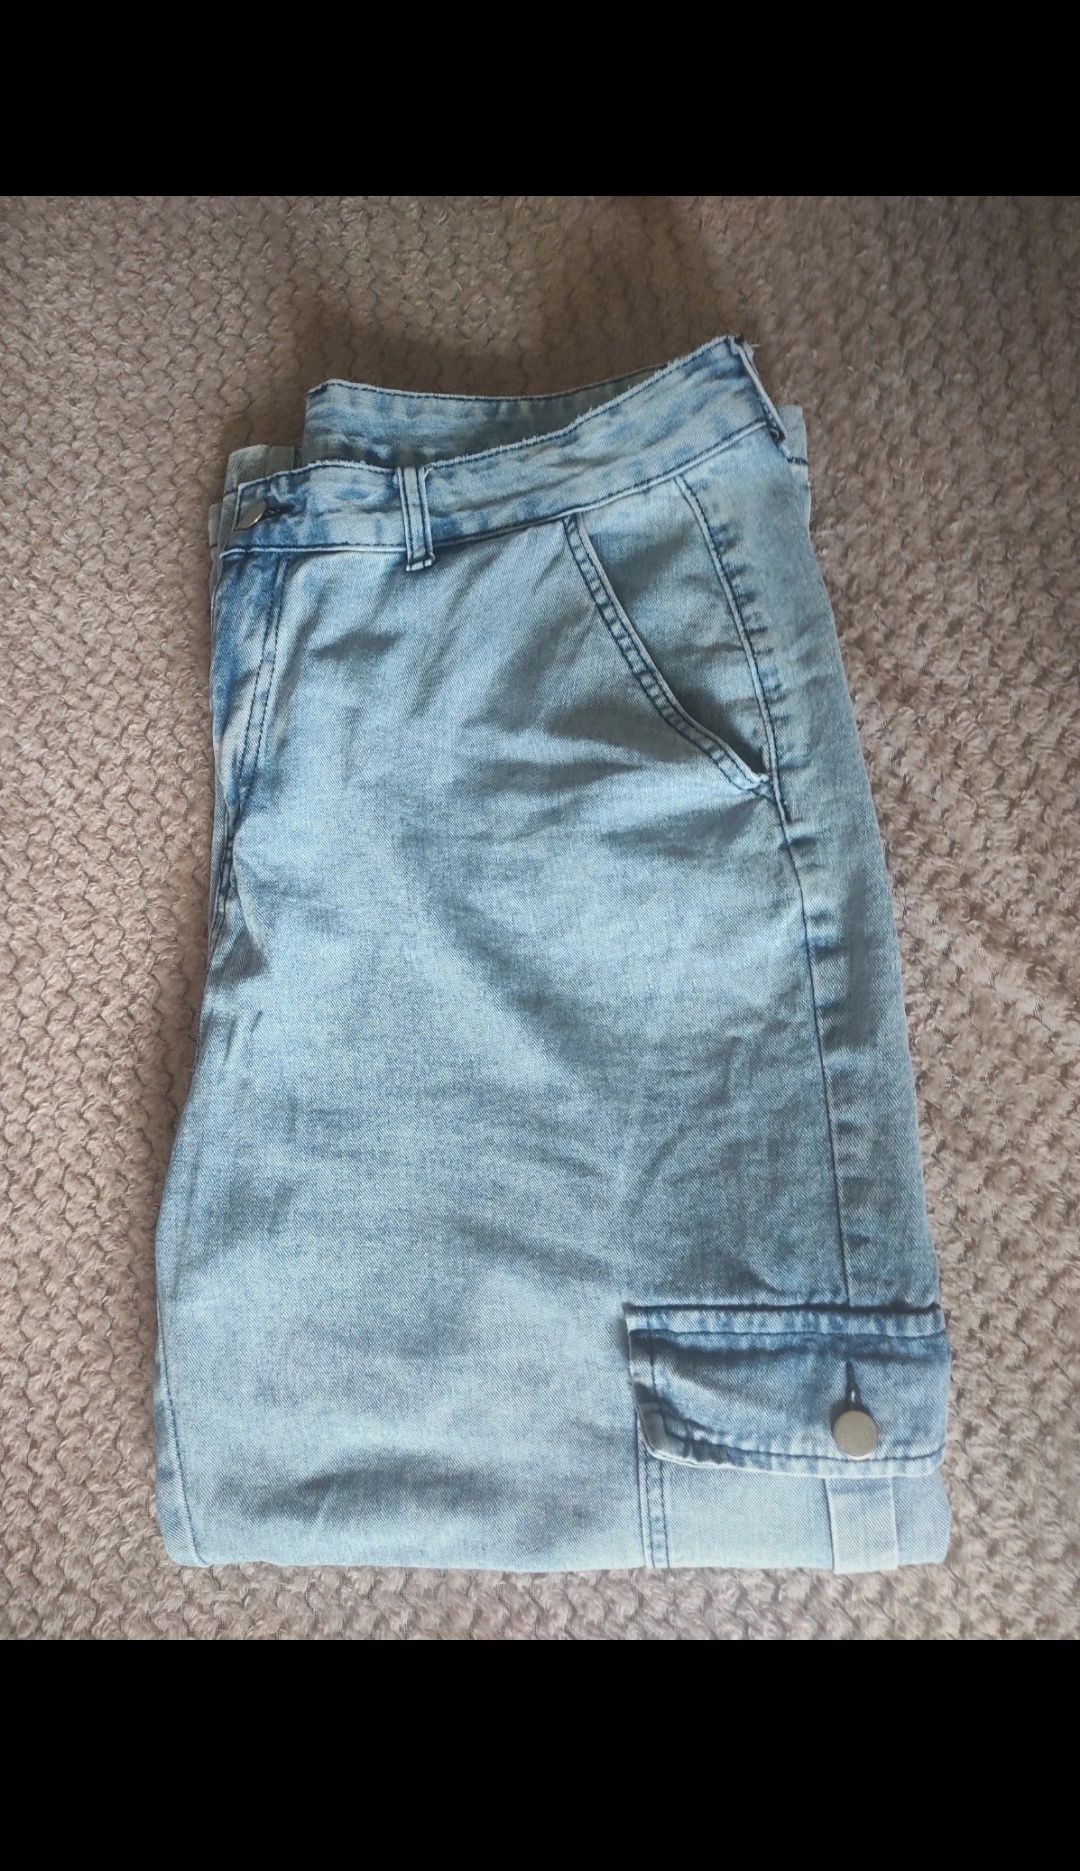 Baggy jeans cargo